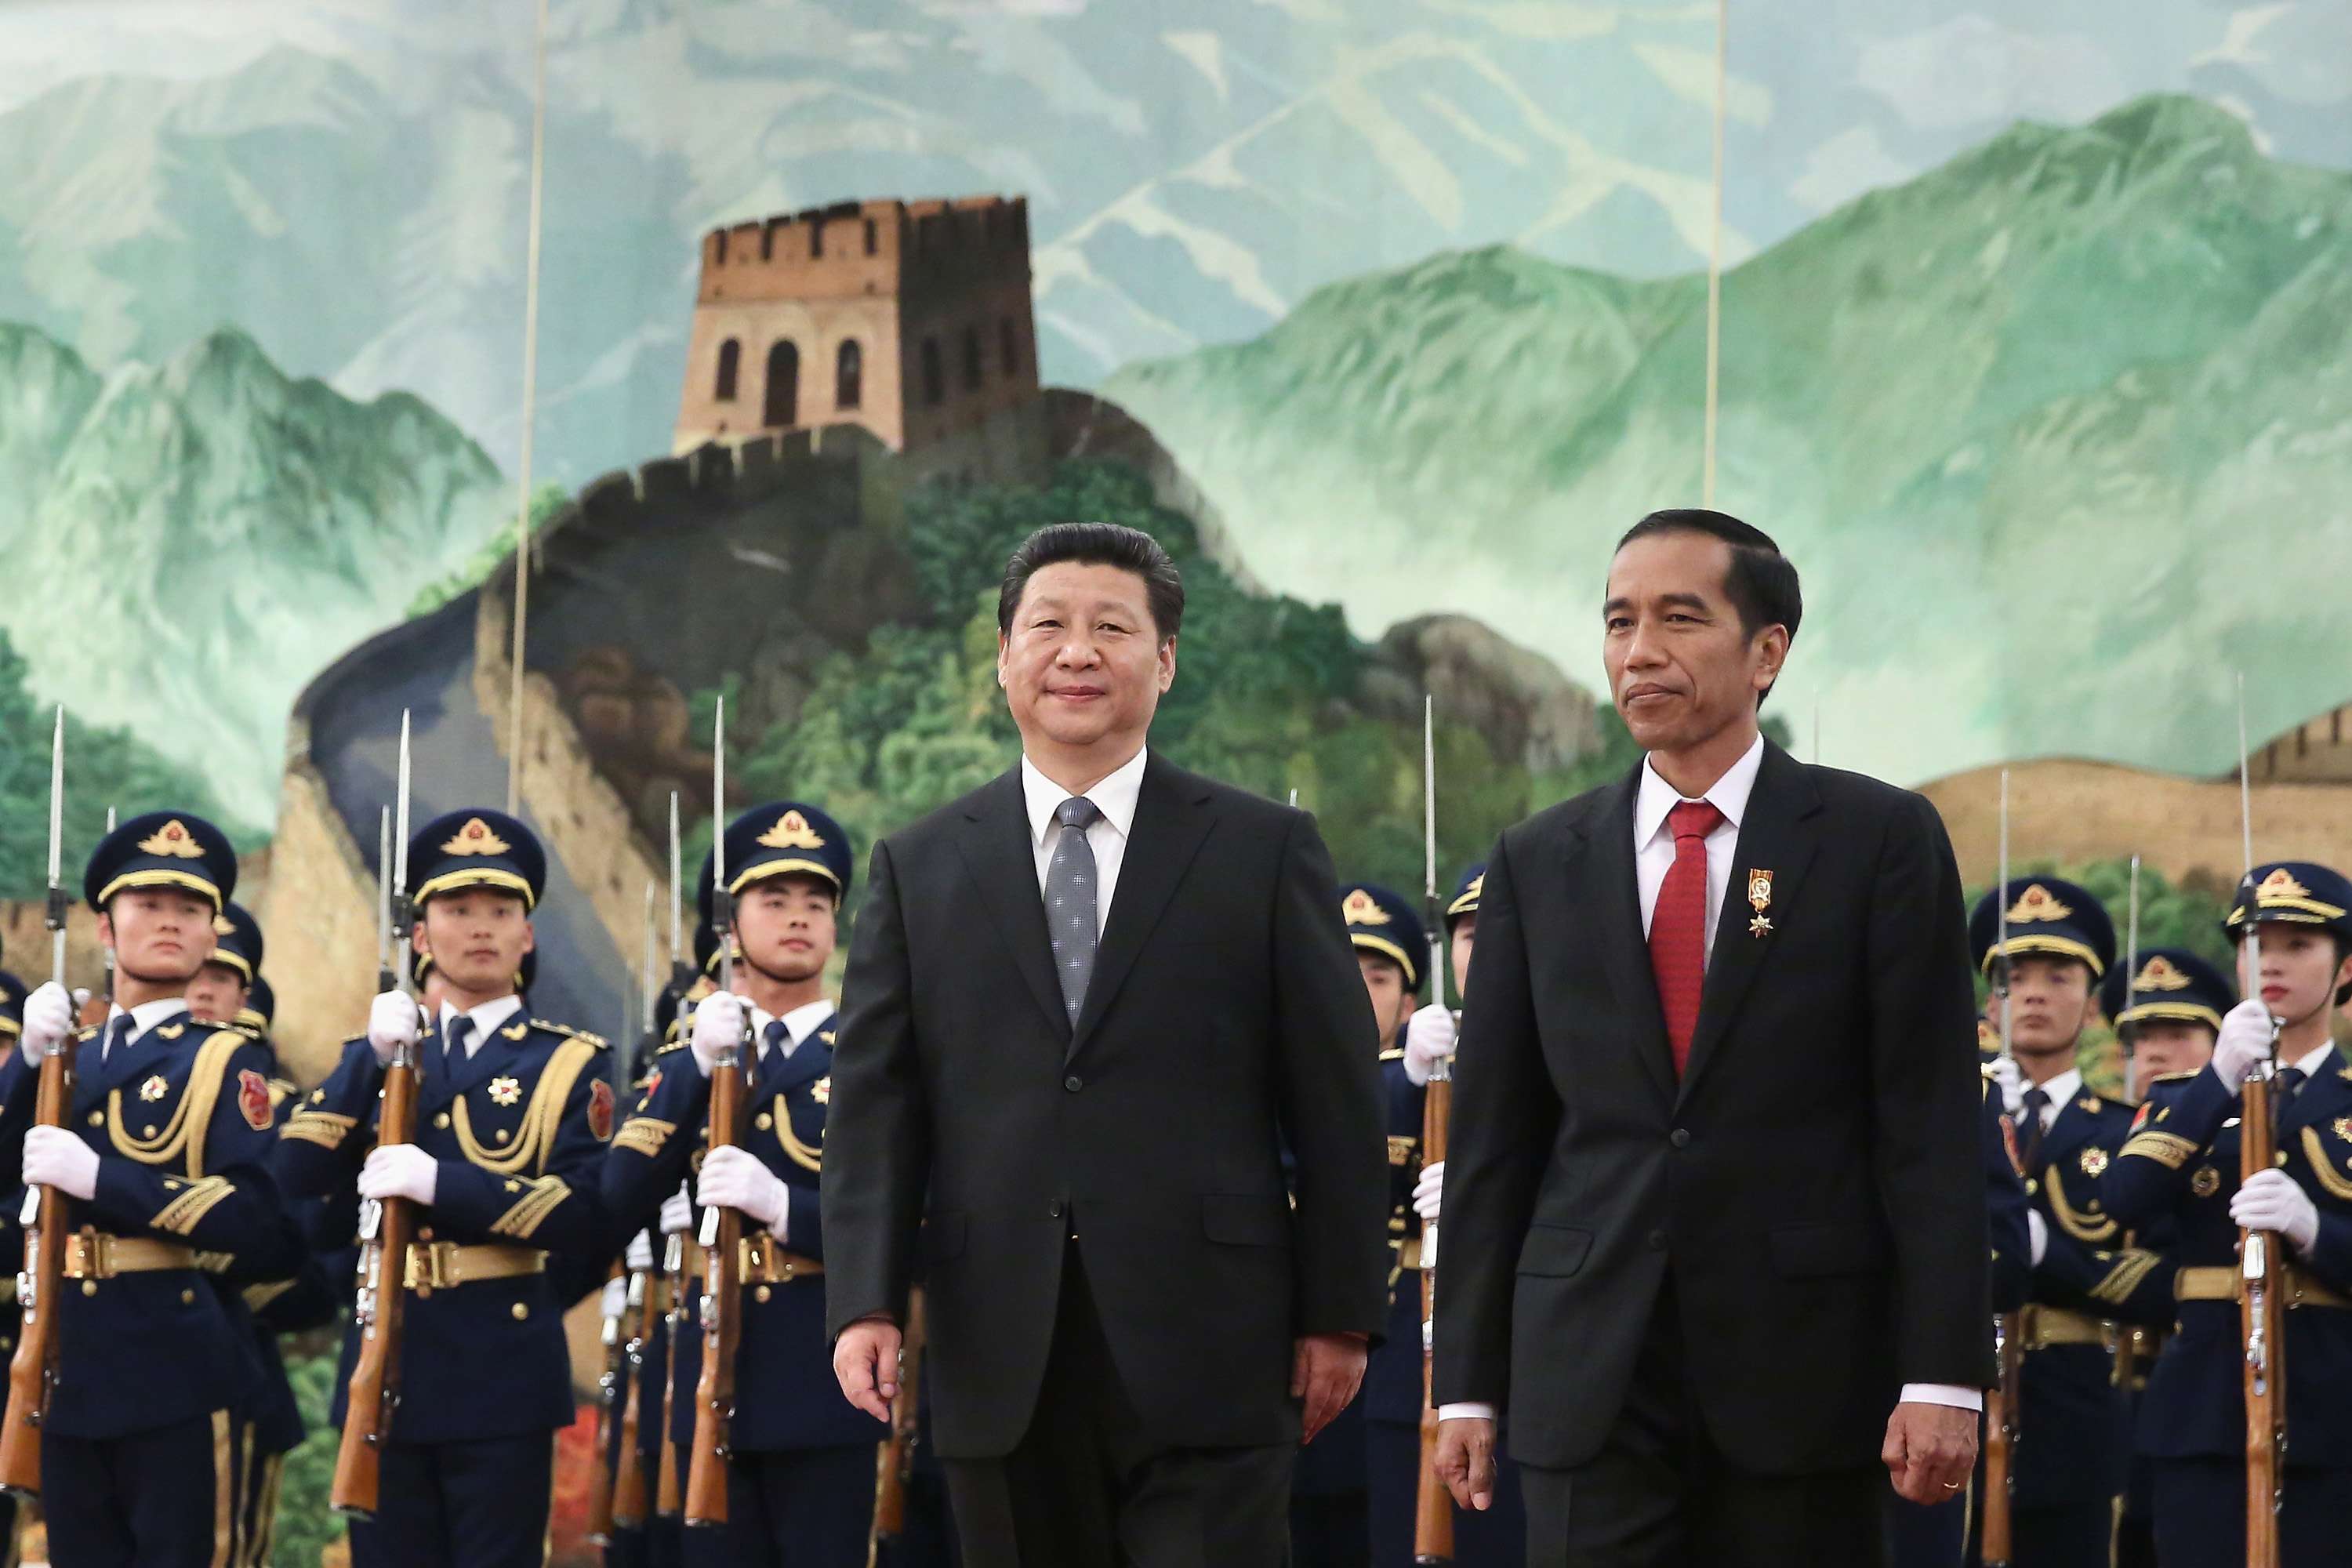 President Xi Jinping and his visiting Indonesian counterpart, Joko Widodo, view an honour guard during a welcoming ceremony at the Great Hall of the People in Beijing in March 2015. Photo: AFP